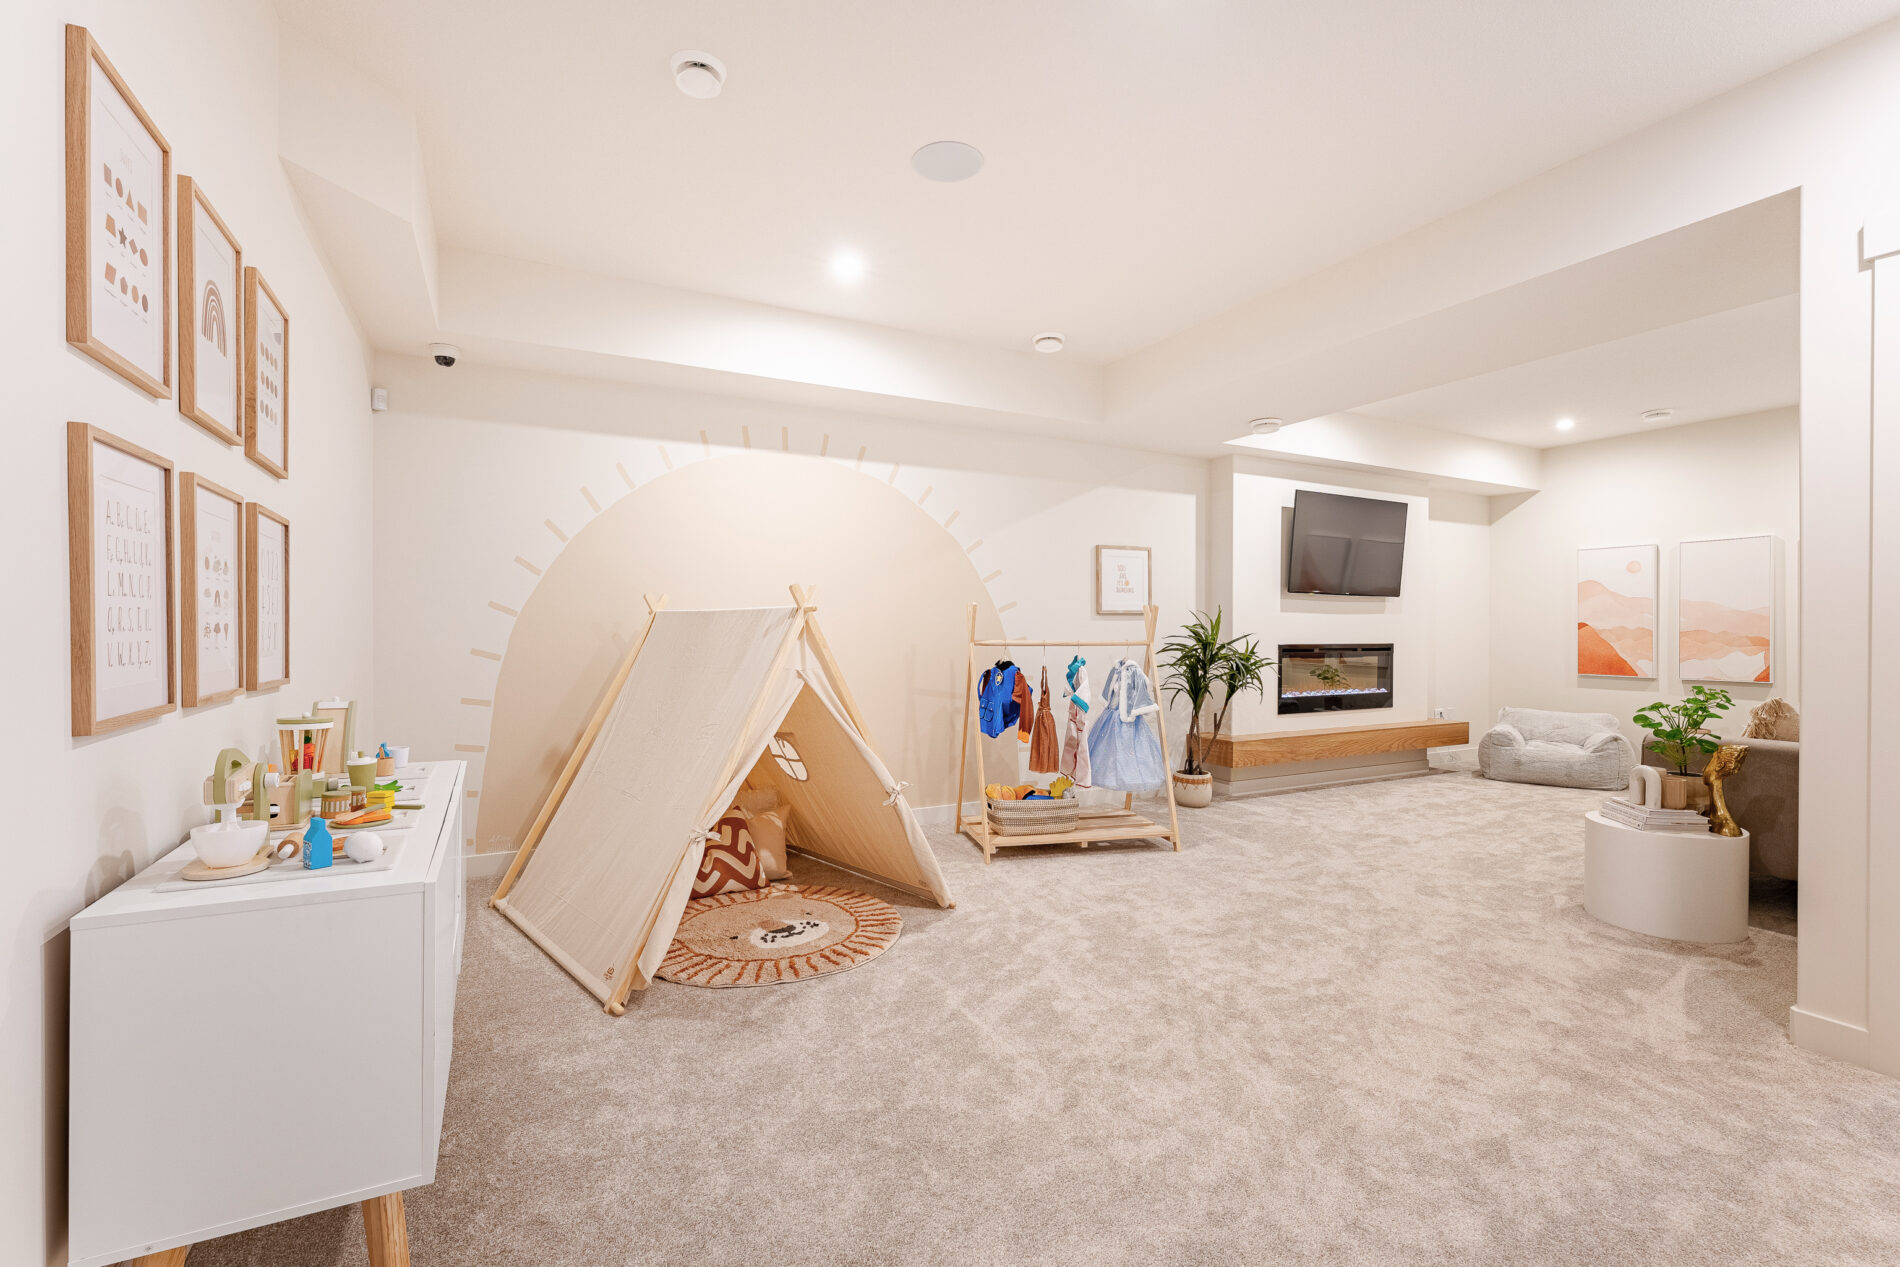 Imagination and play corner for kids in the basement of a house with costumes on a hanging rack and a small canvas play tent